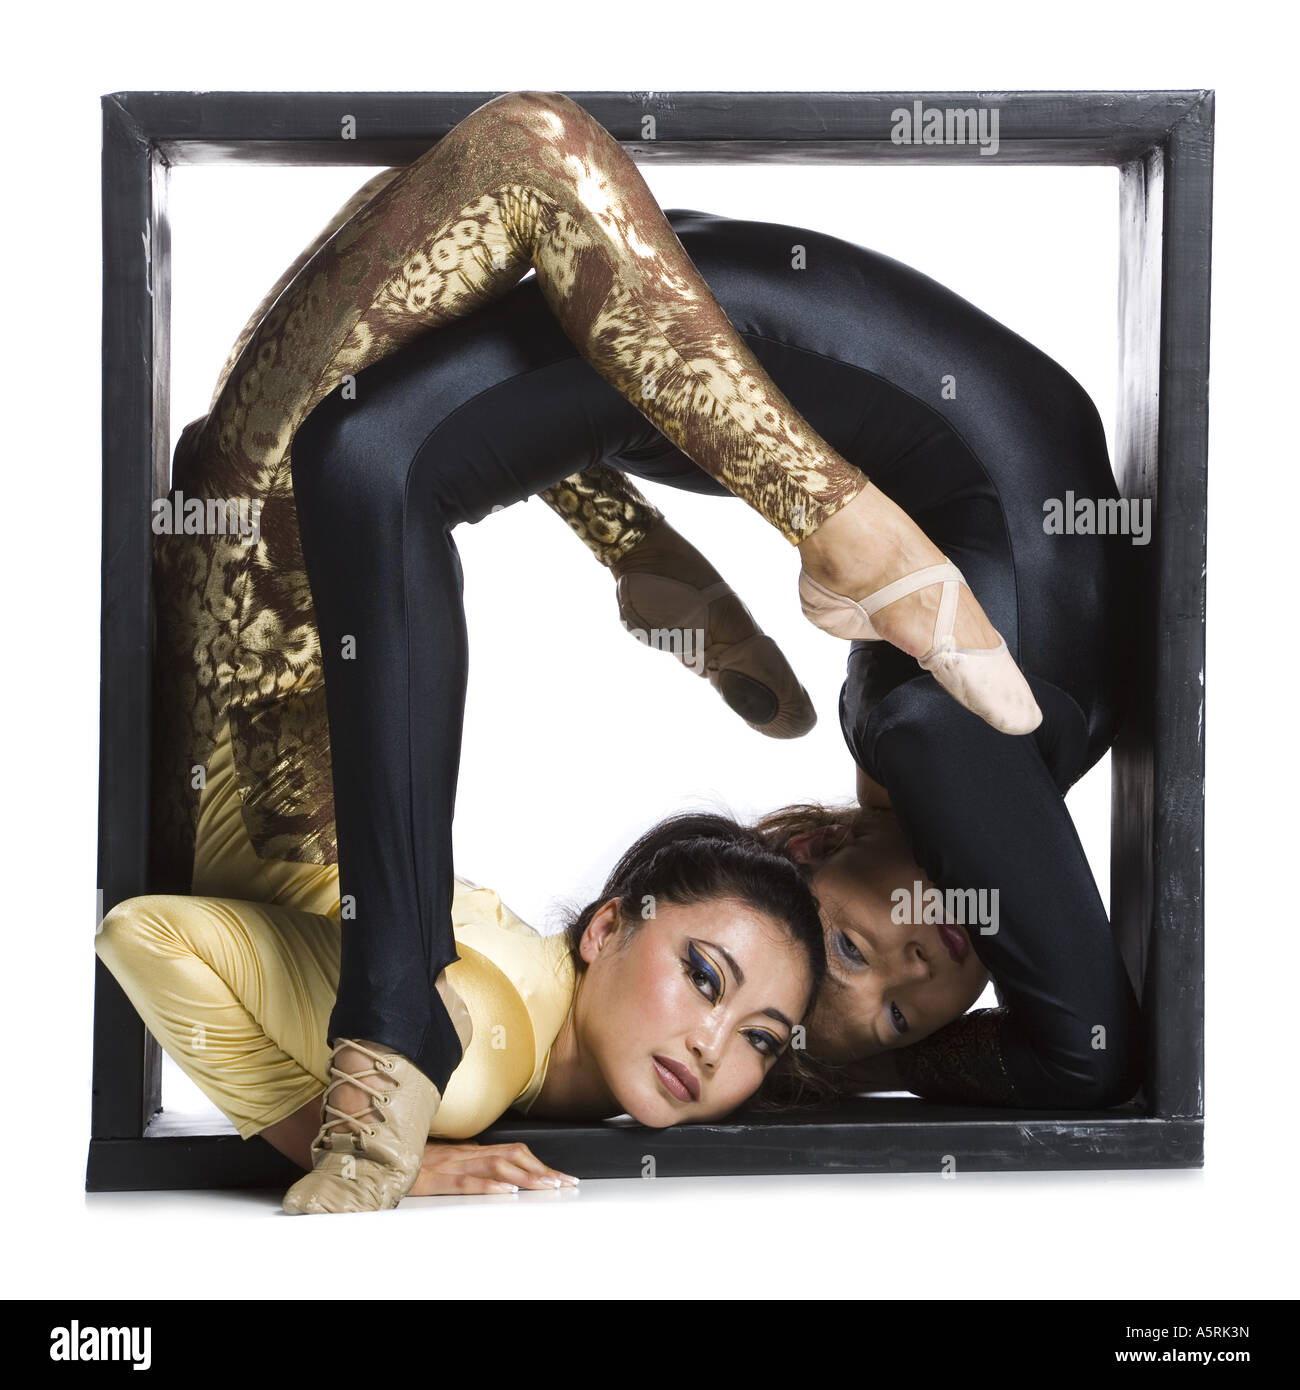 Female contortionist duo inside the box Stock Photo